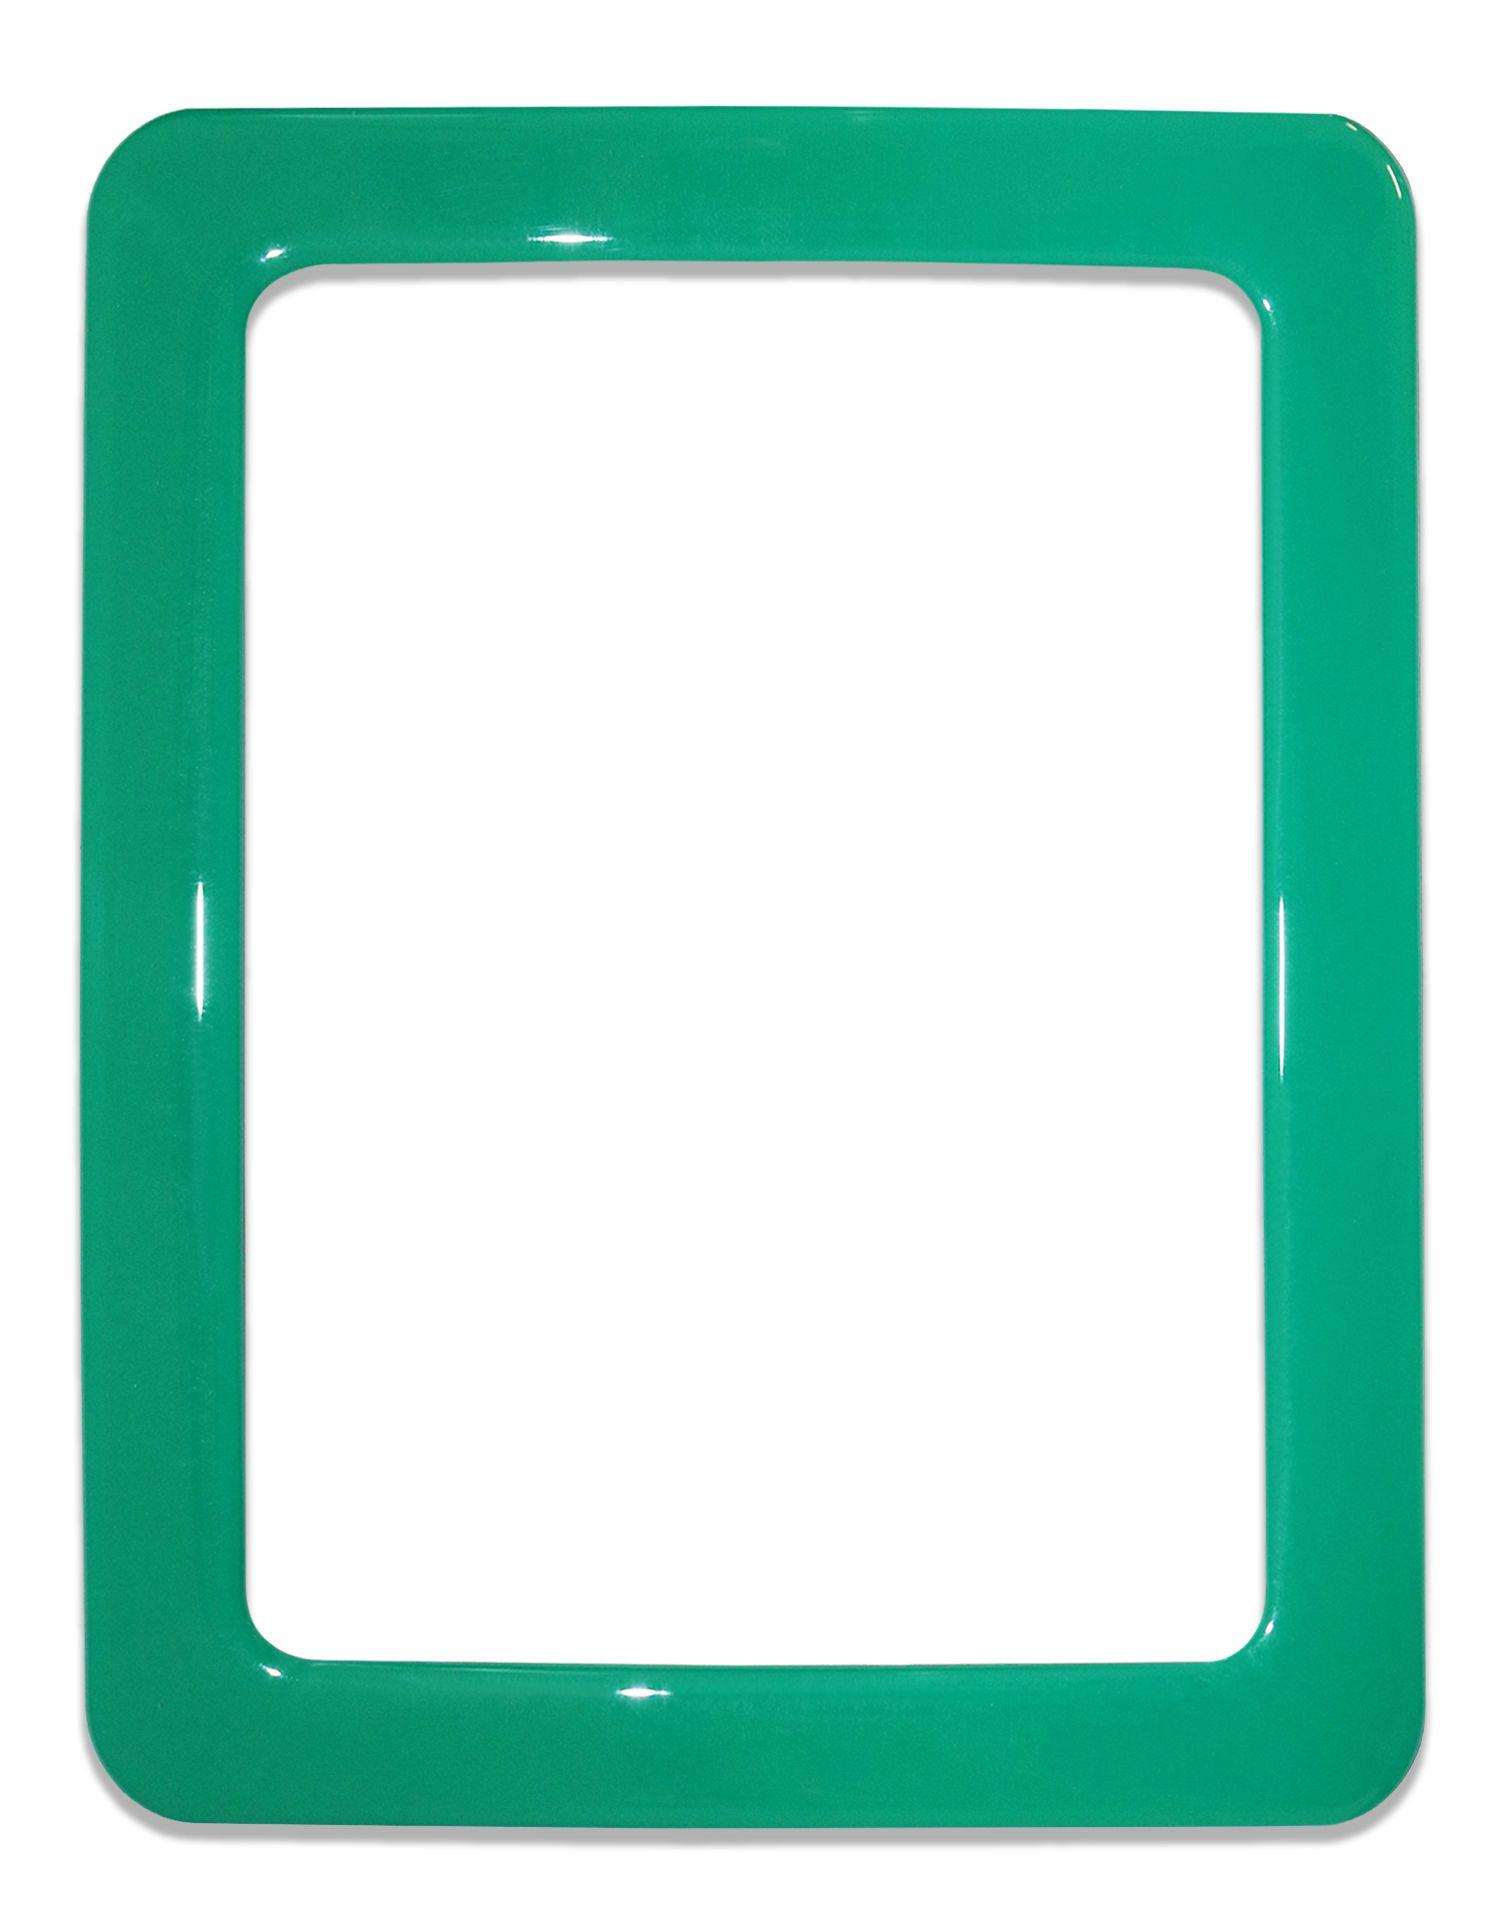 Magnetic self-adhesive frame size 16.0x11.8cm - green